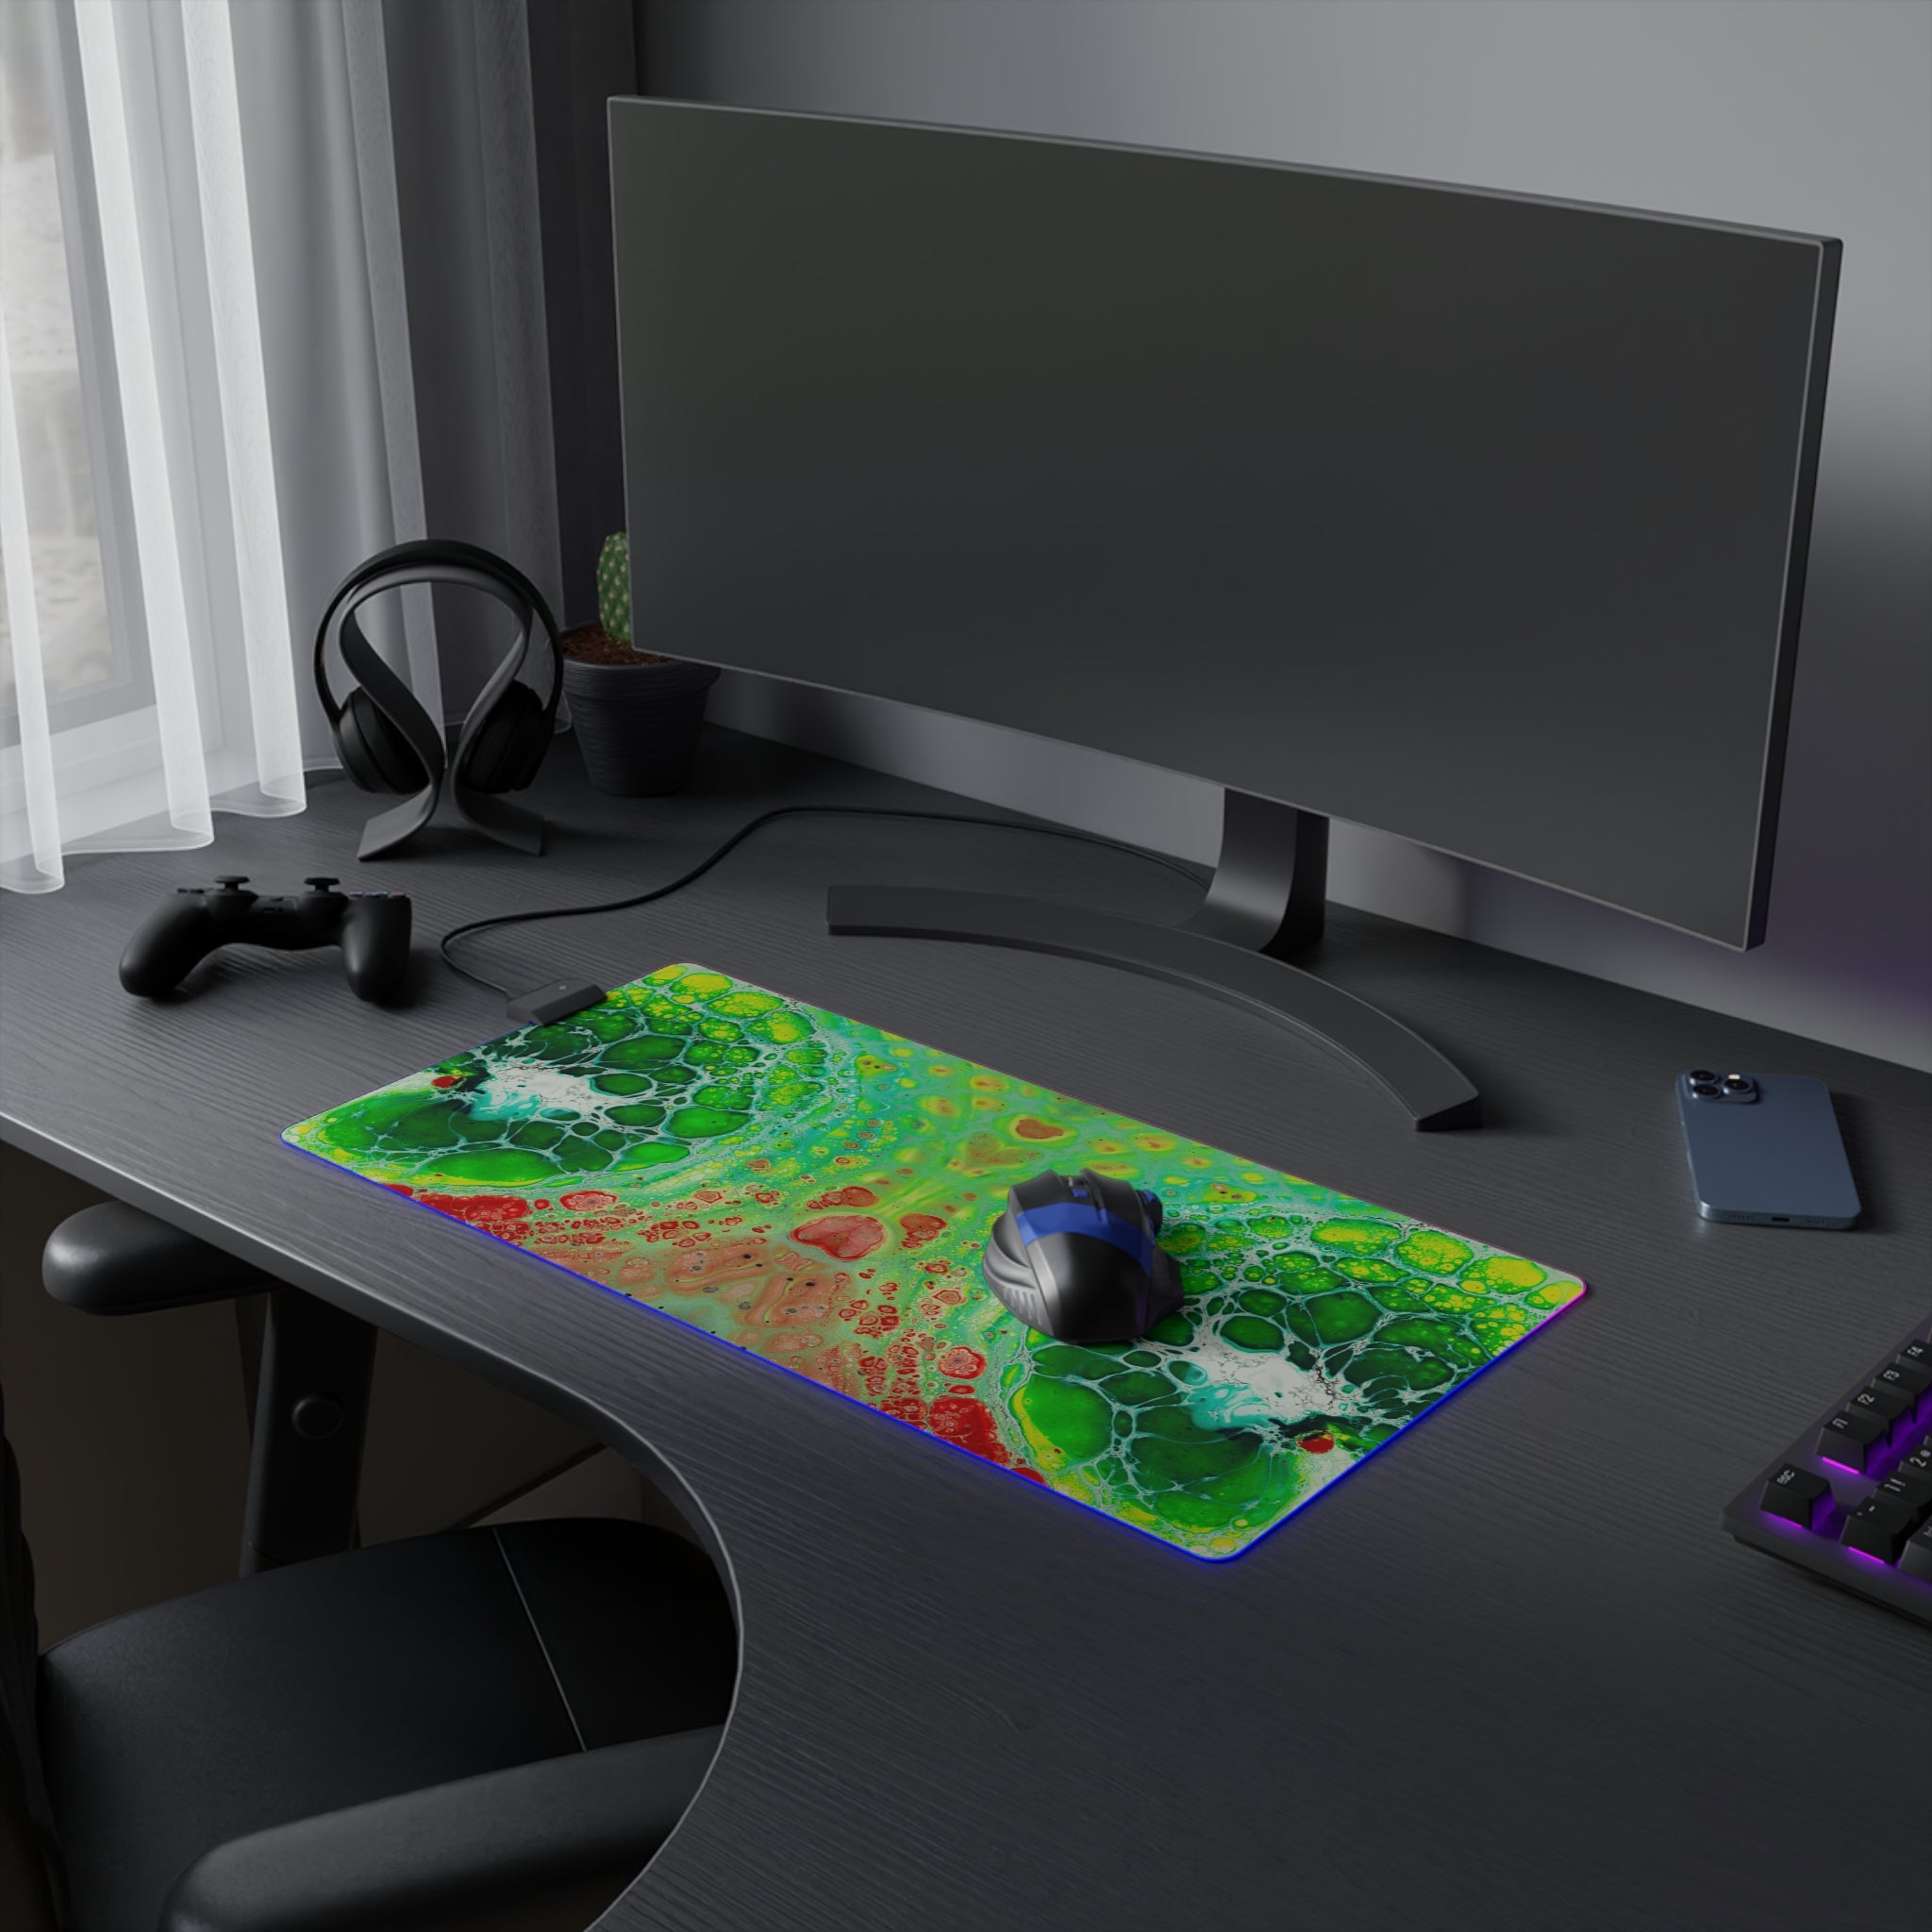 Cameron Creations - LED Gaming Mouse Pad - Up Close - Concept 4